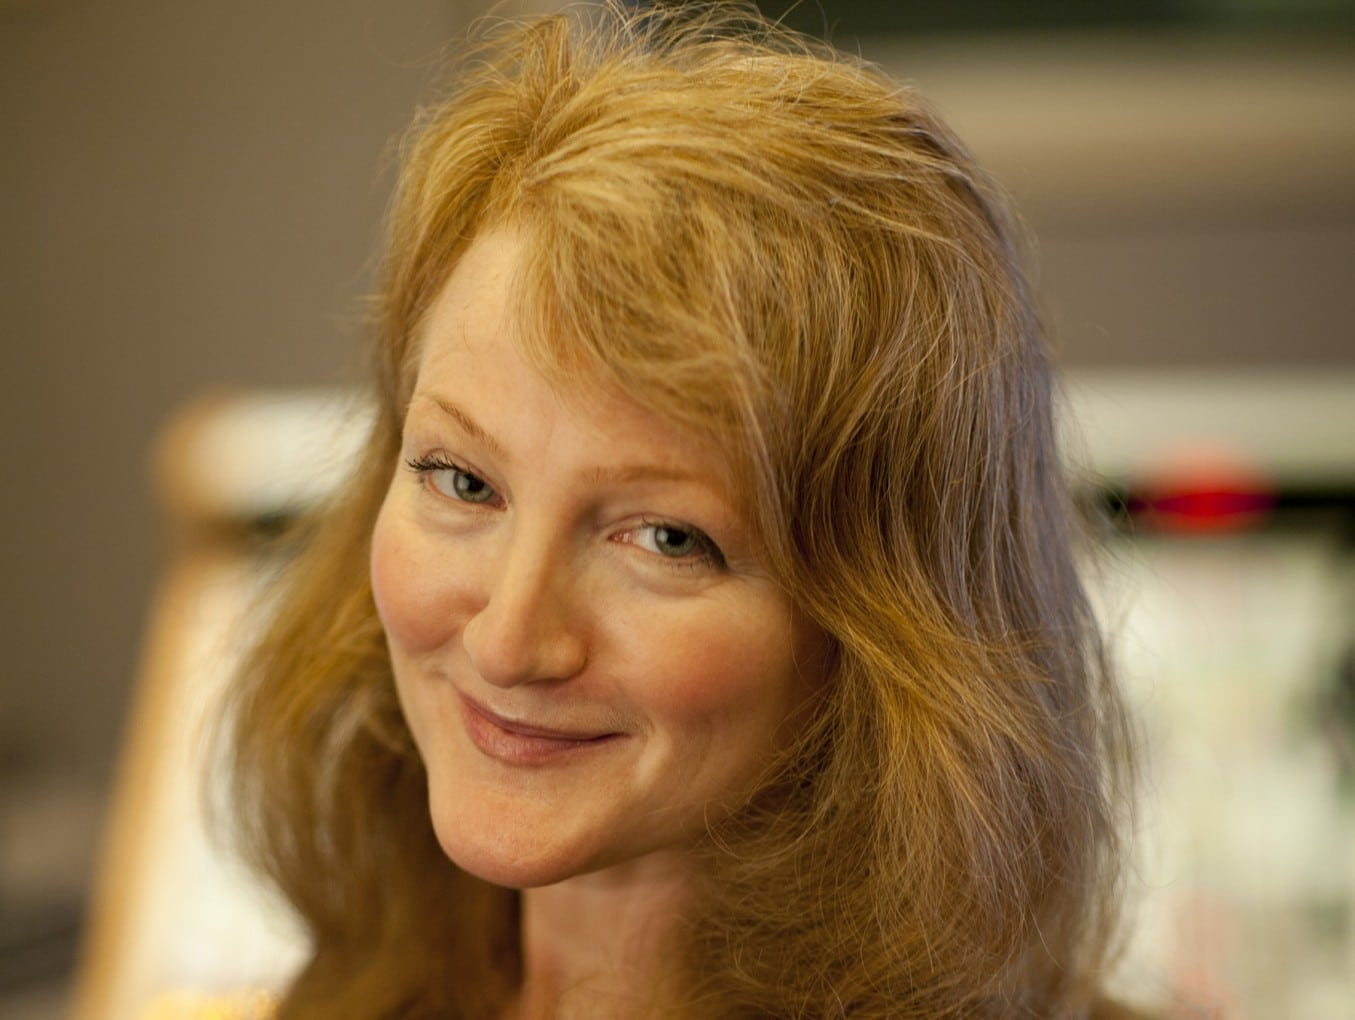 Krista Tippett: On Productivity and Protecting Space for Deep Thinking and Reflection